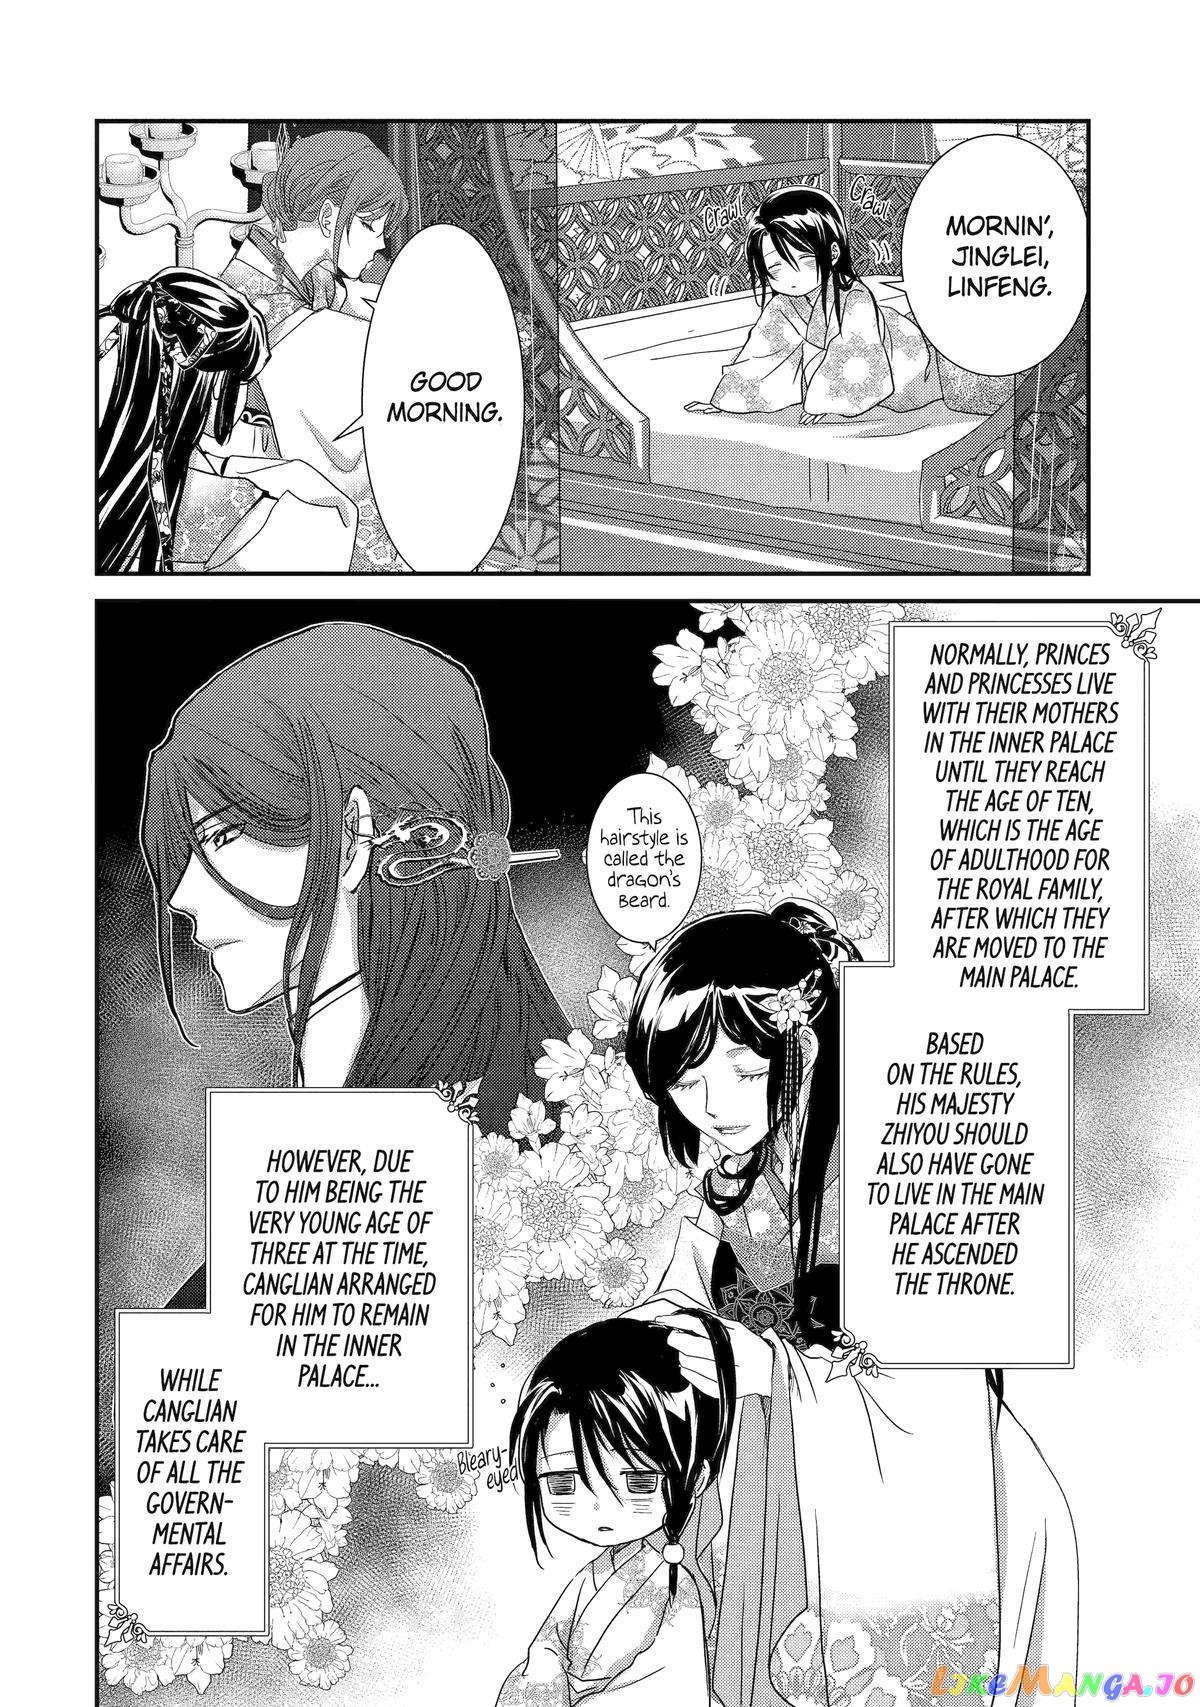 The Emperor's Caretaker: I'm Too Happy Living as a Lady-in-Waiting to Leave the Palace chapter 8 - page 6